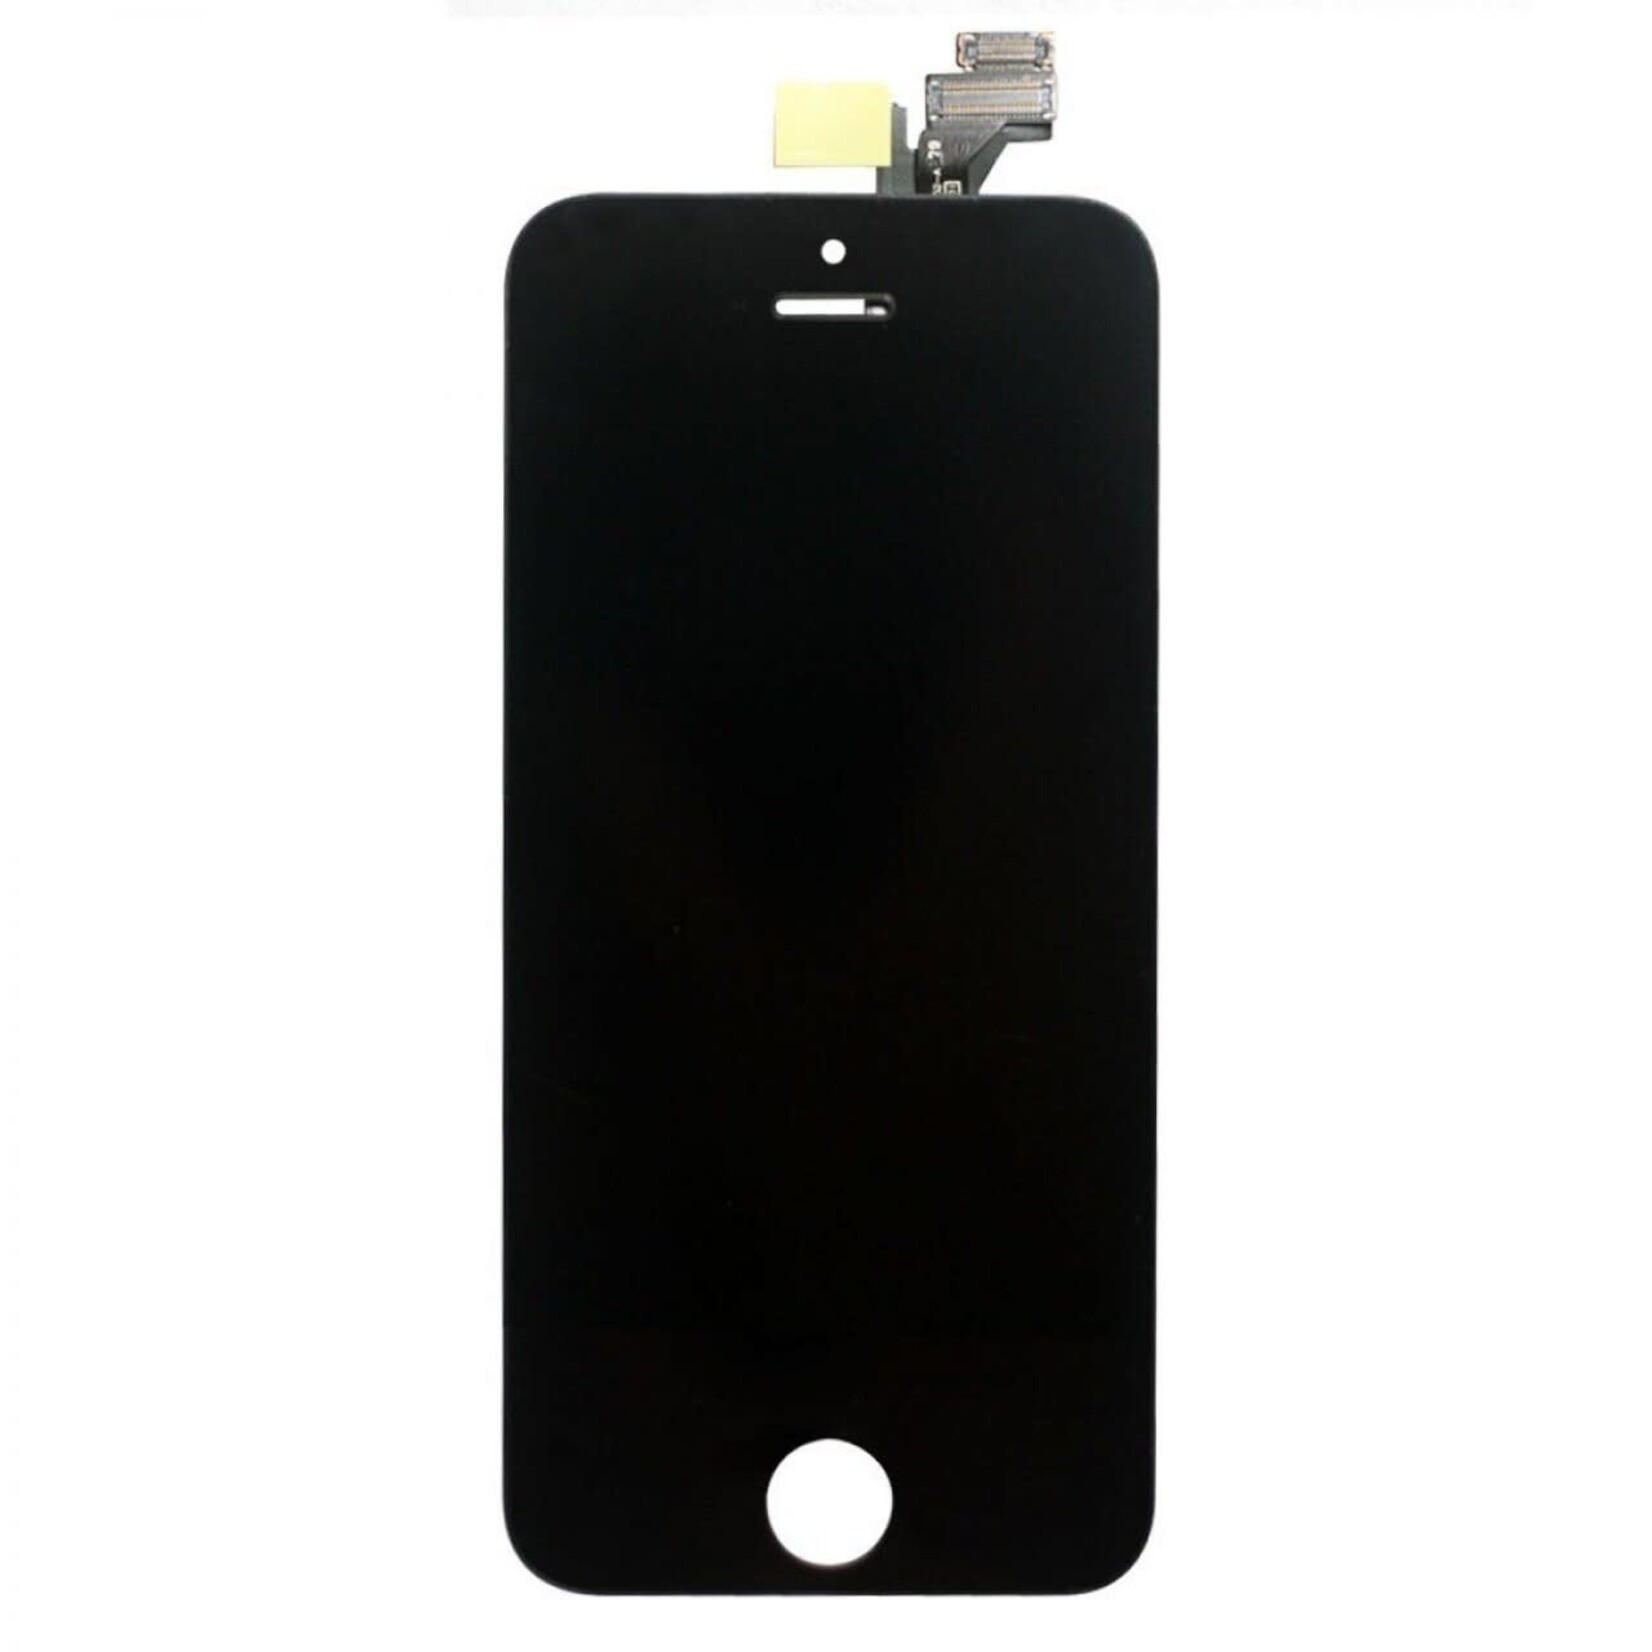 Apple USAGÉ / USED LCD DIGITIZER ASSEMBLY IPHONE 5 BLACK